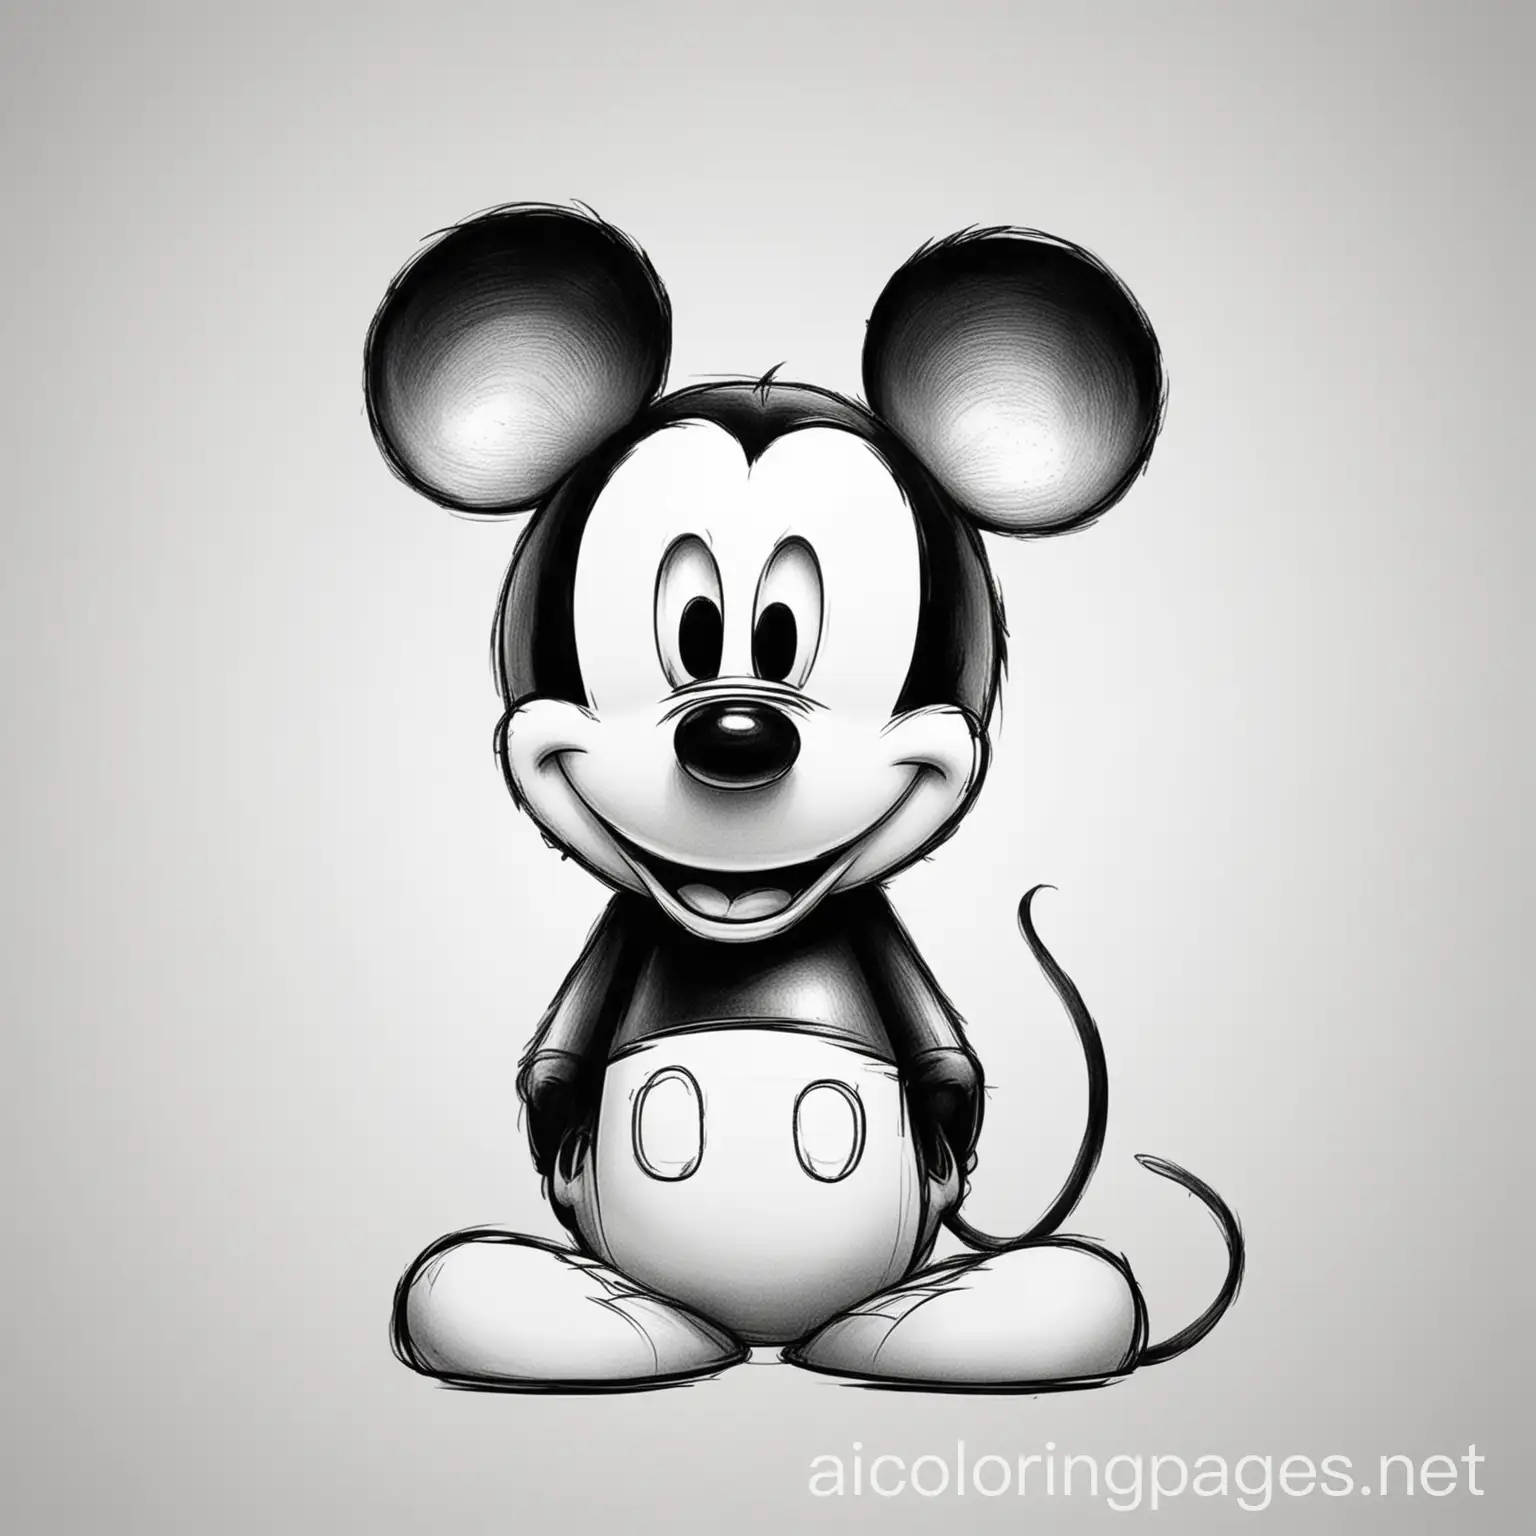 mickey mouse, Coloring Page, black and white, line art, white background, Simplicity, Ample White Space. The background of the coloring page is plain white to make it easy for young children to color within the lines. The outlines of all the subjects are easy to distinguish, making it simple for kids to color without too much difficulty